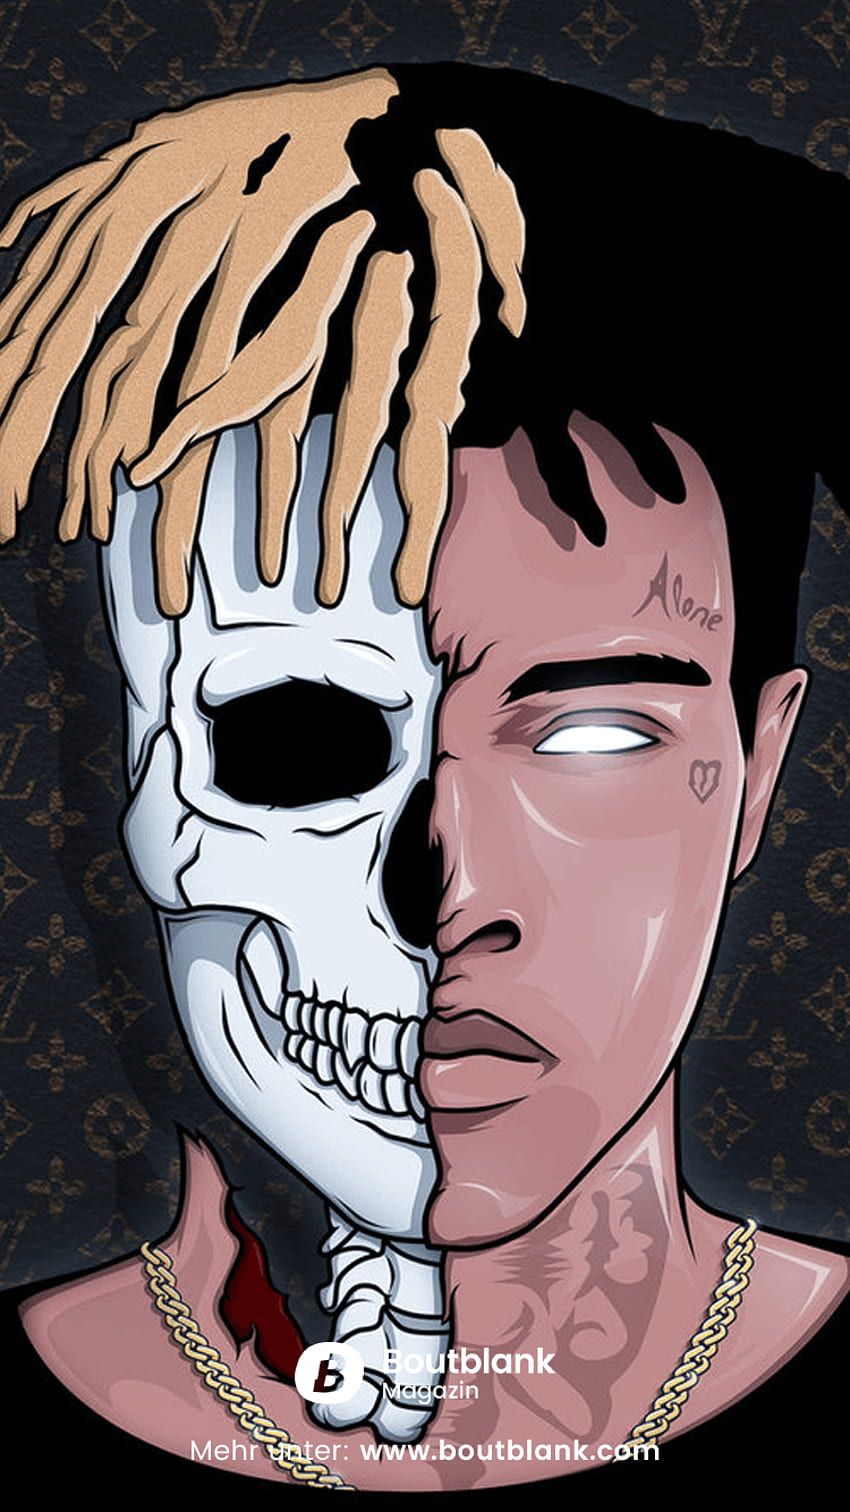 XXXTentacion for iPhone and Android, Rapper iPhone HD phone wallpaper